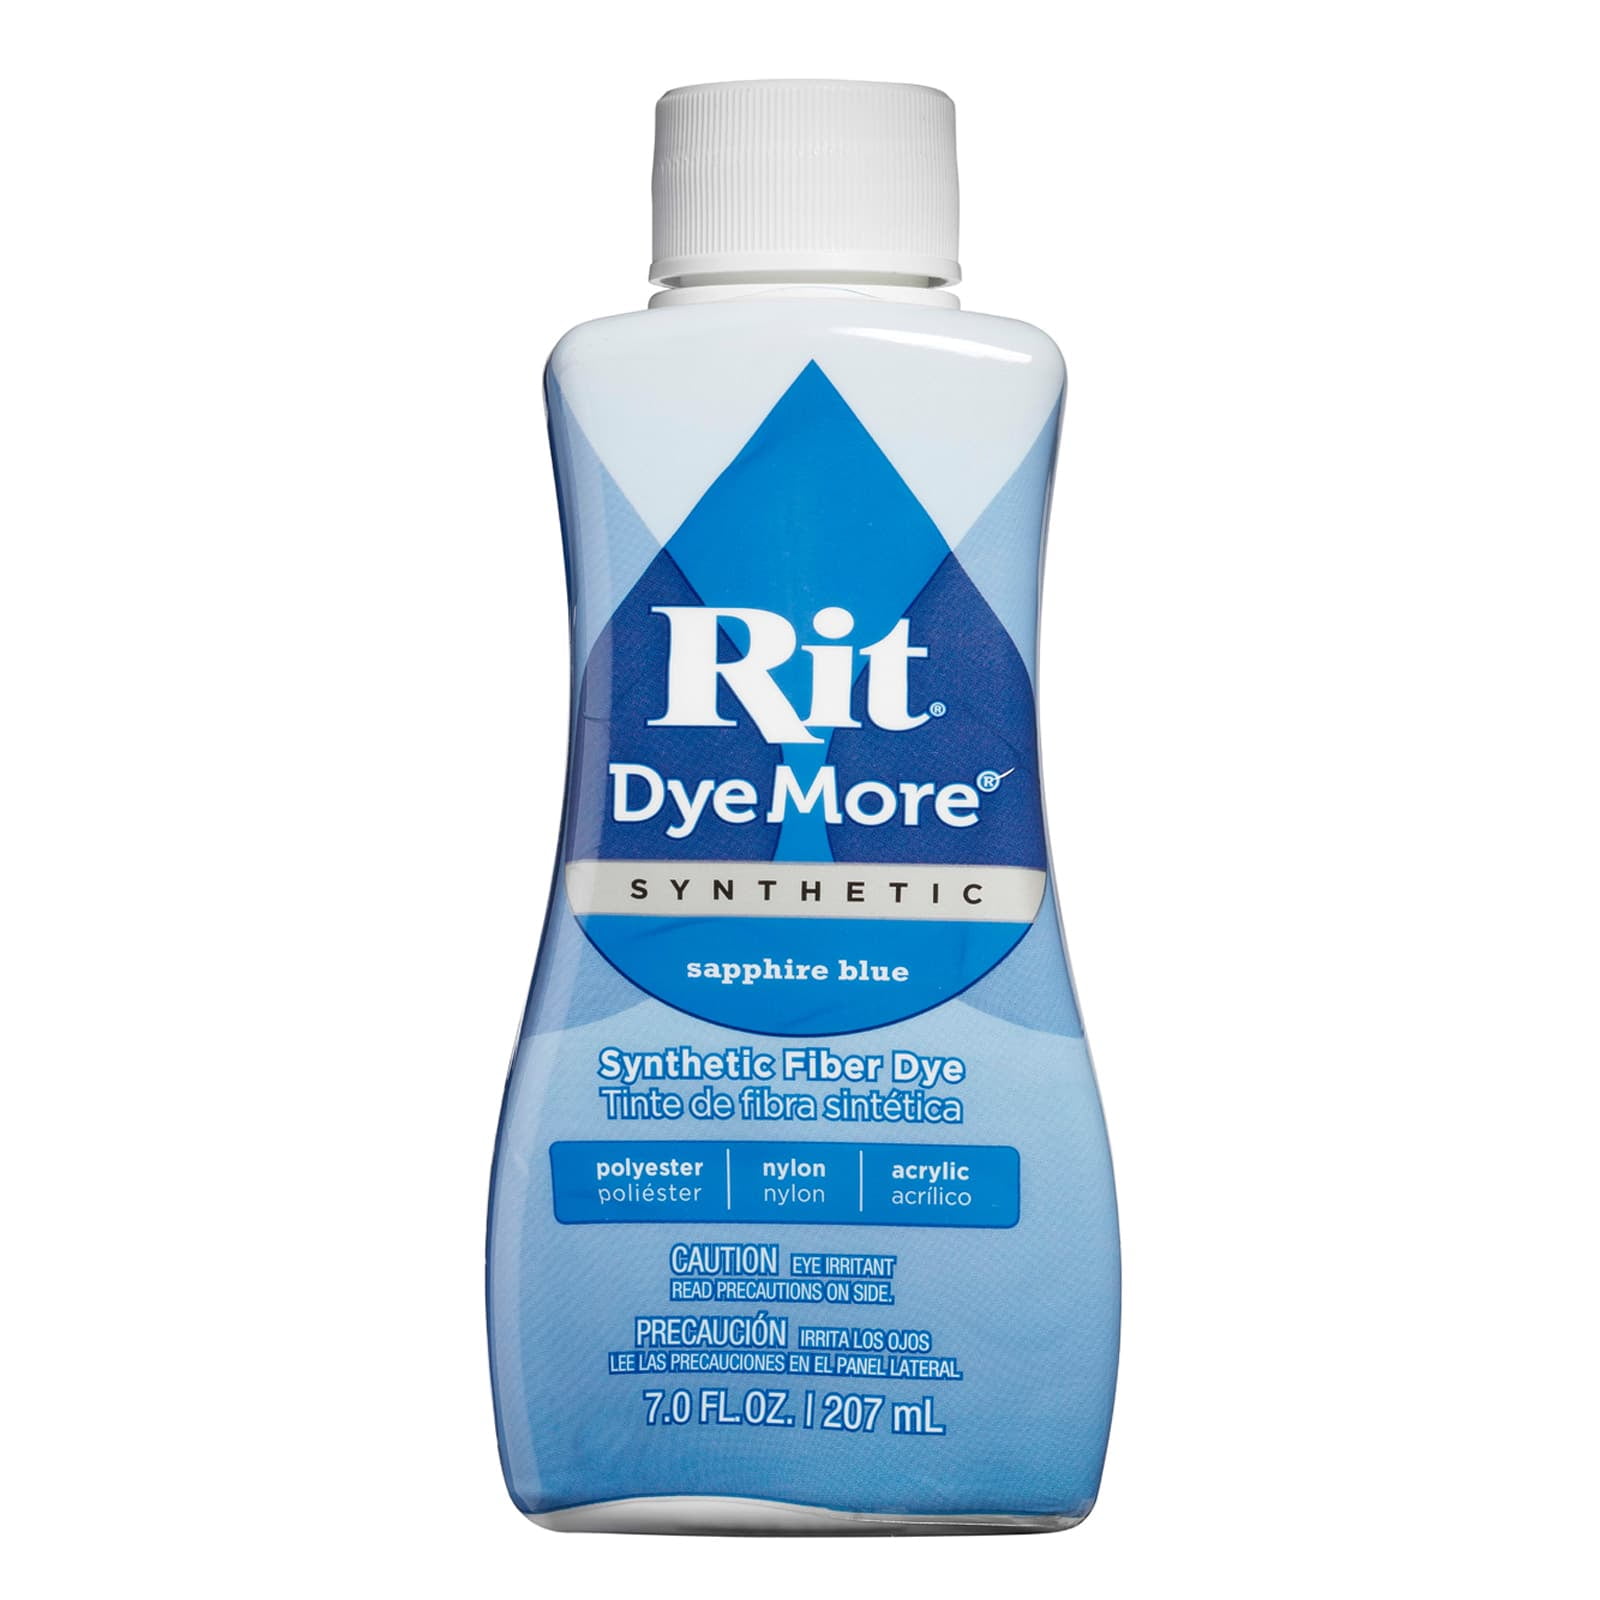  Rit DyeMore Synthetic Liquid Dye, 12 Pack, Works with  Polyester, Acrylic, Plastics, Nylon, and Other Fabrics